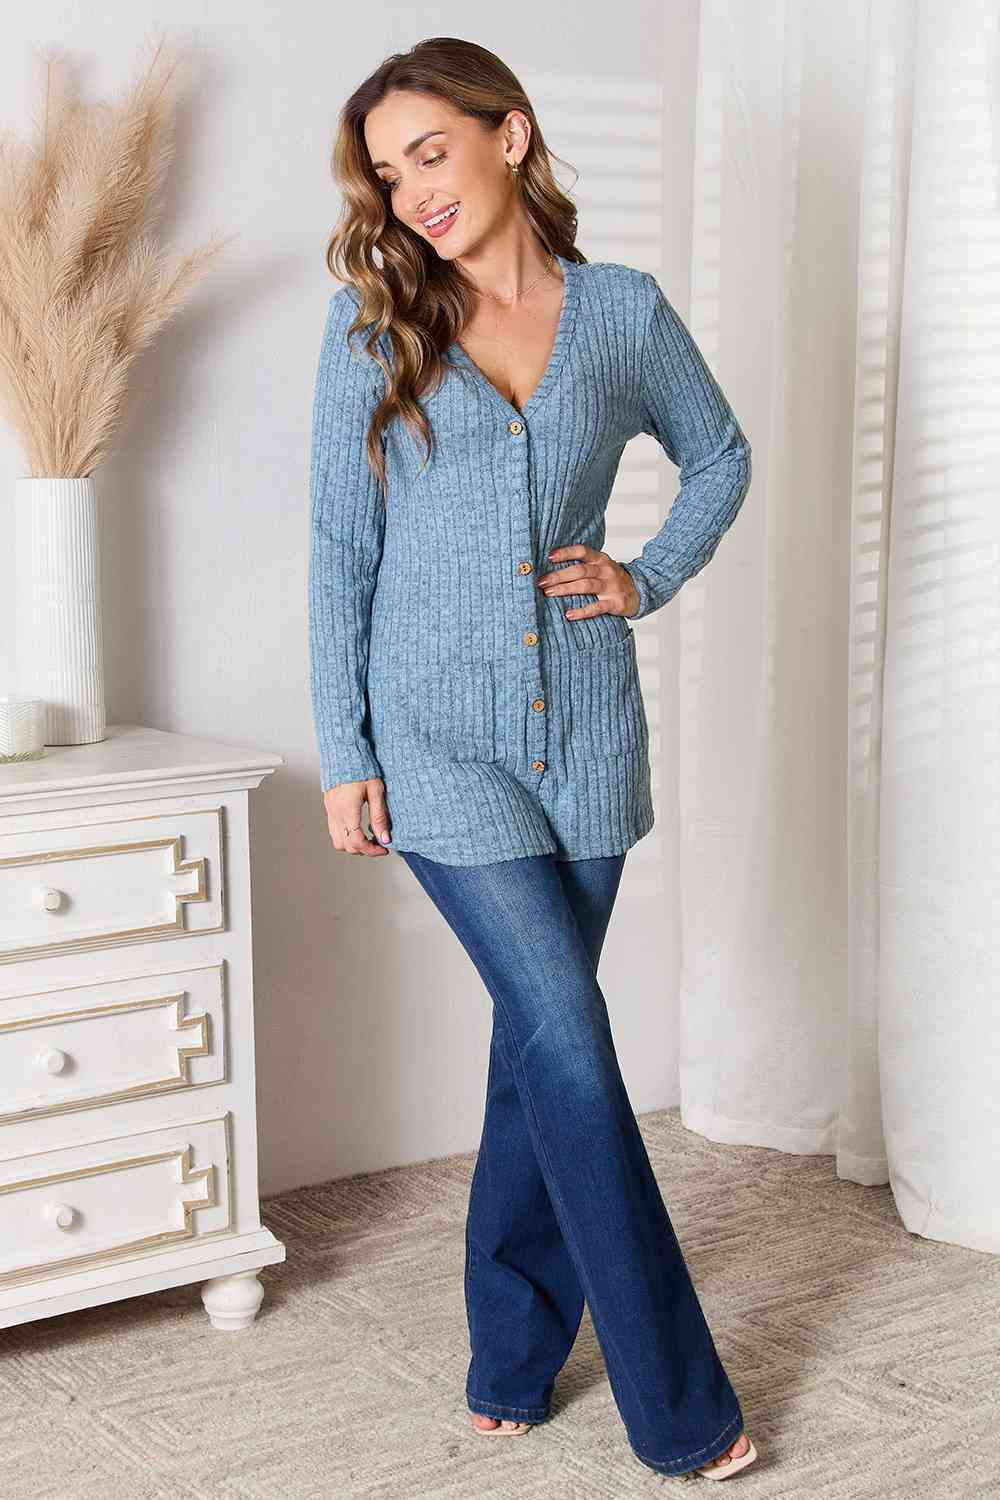 Ribbed Button-Up Cardigan with Pockets - Kawaii Stop - Button-Up, Cardigan, Classic Look, Double Take, Effortless Elegance, Flexible Fit, Functional Fashion, Must-Have, Opaque, Pockets, Polyester, Ribbed, Ship from USA, Stylish, Versatile